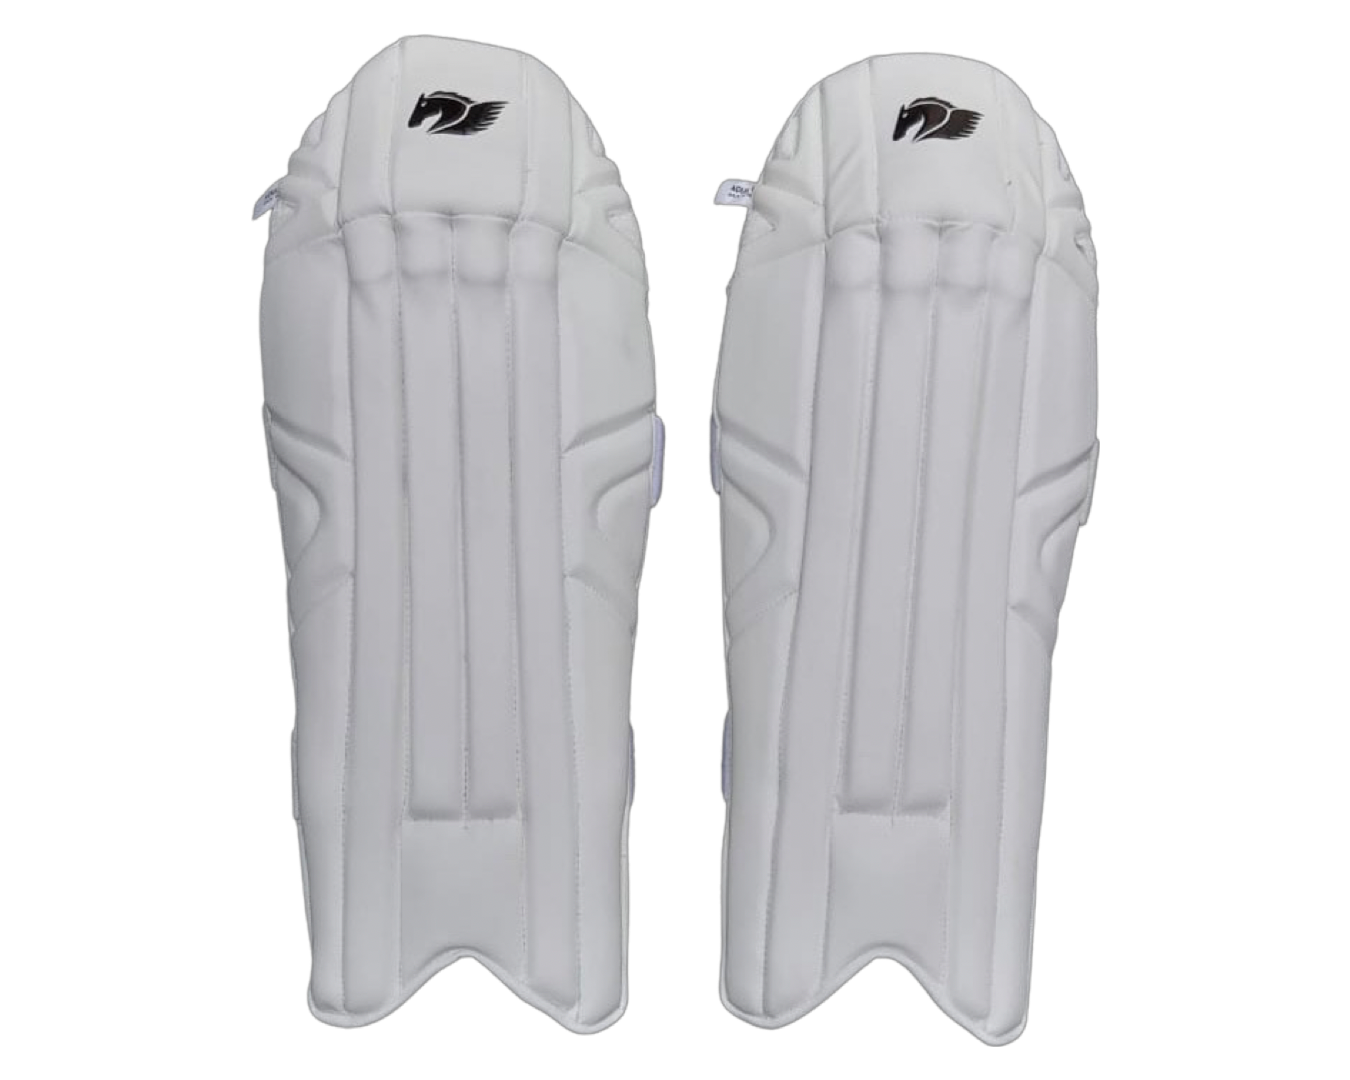 Players Wicket Keeping Pads - White/Carbon White